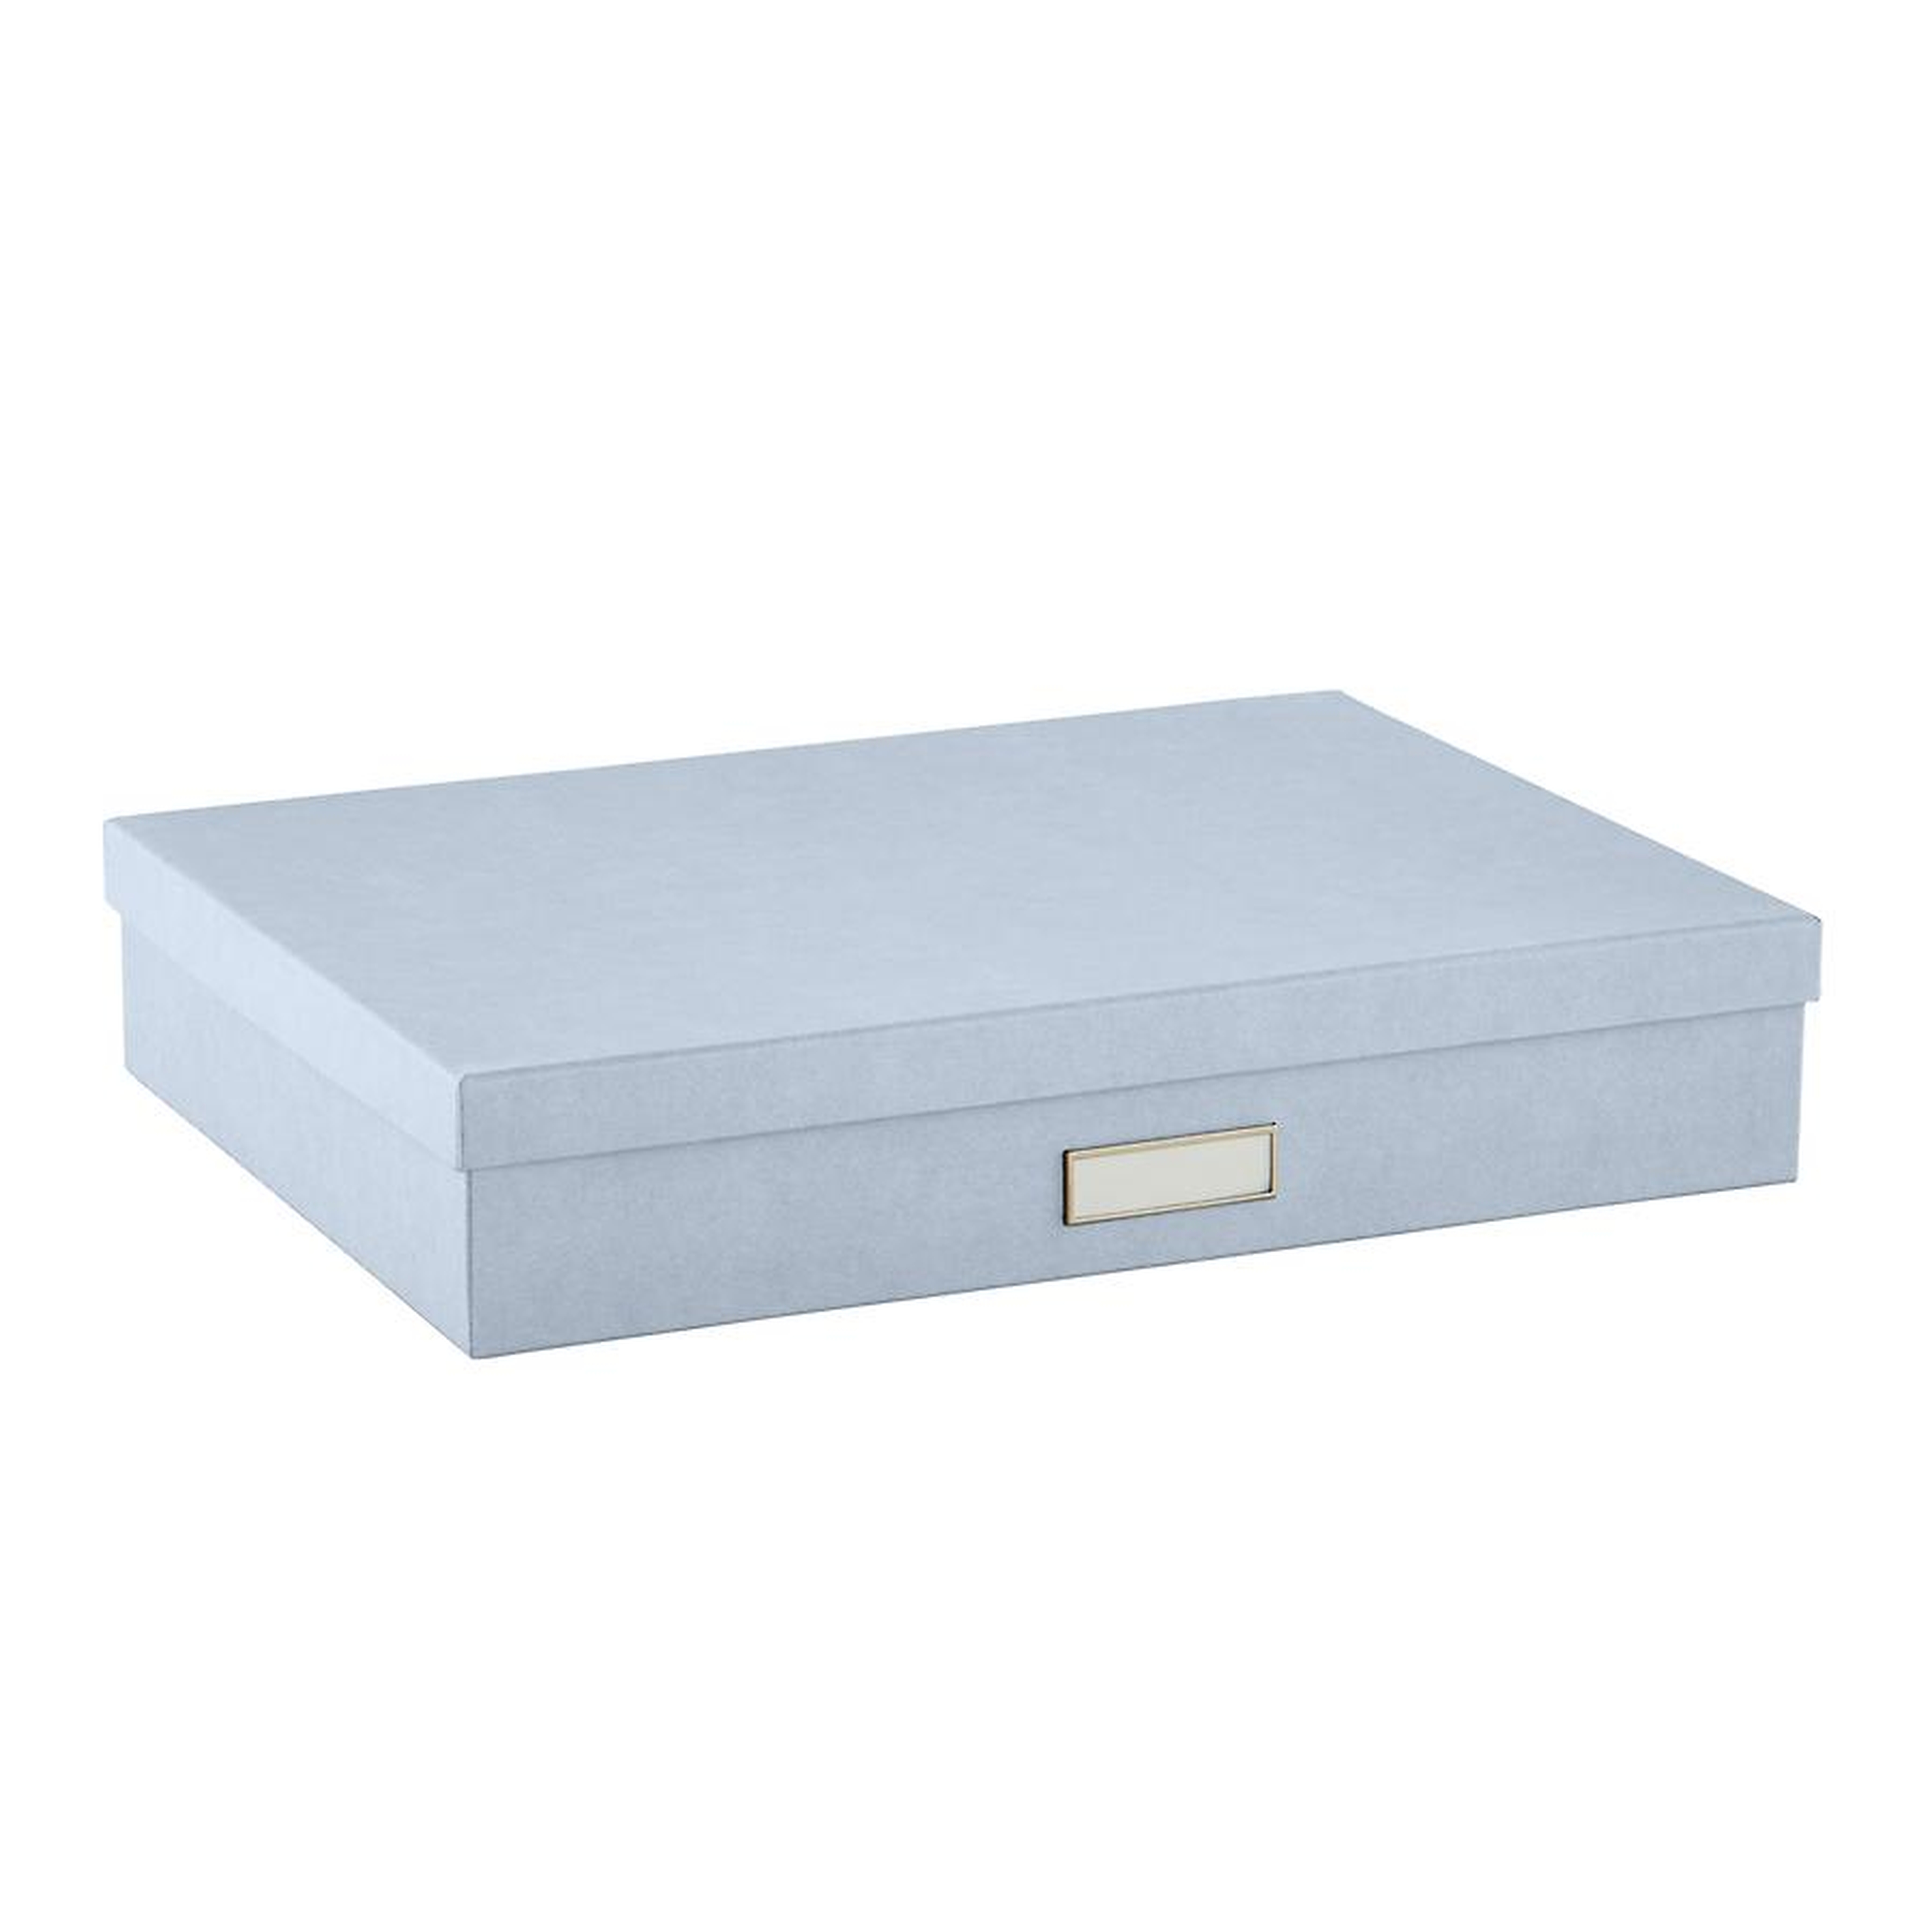 Bigso Stockholm Document Box Steel Blue - containerstore.com